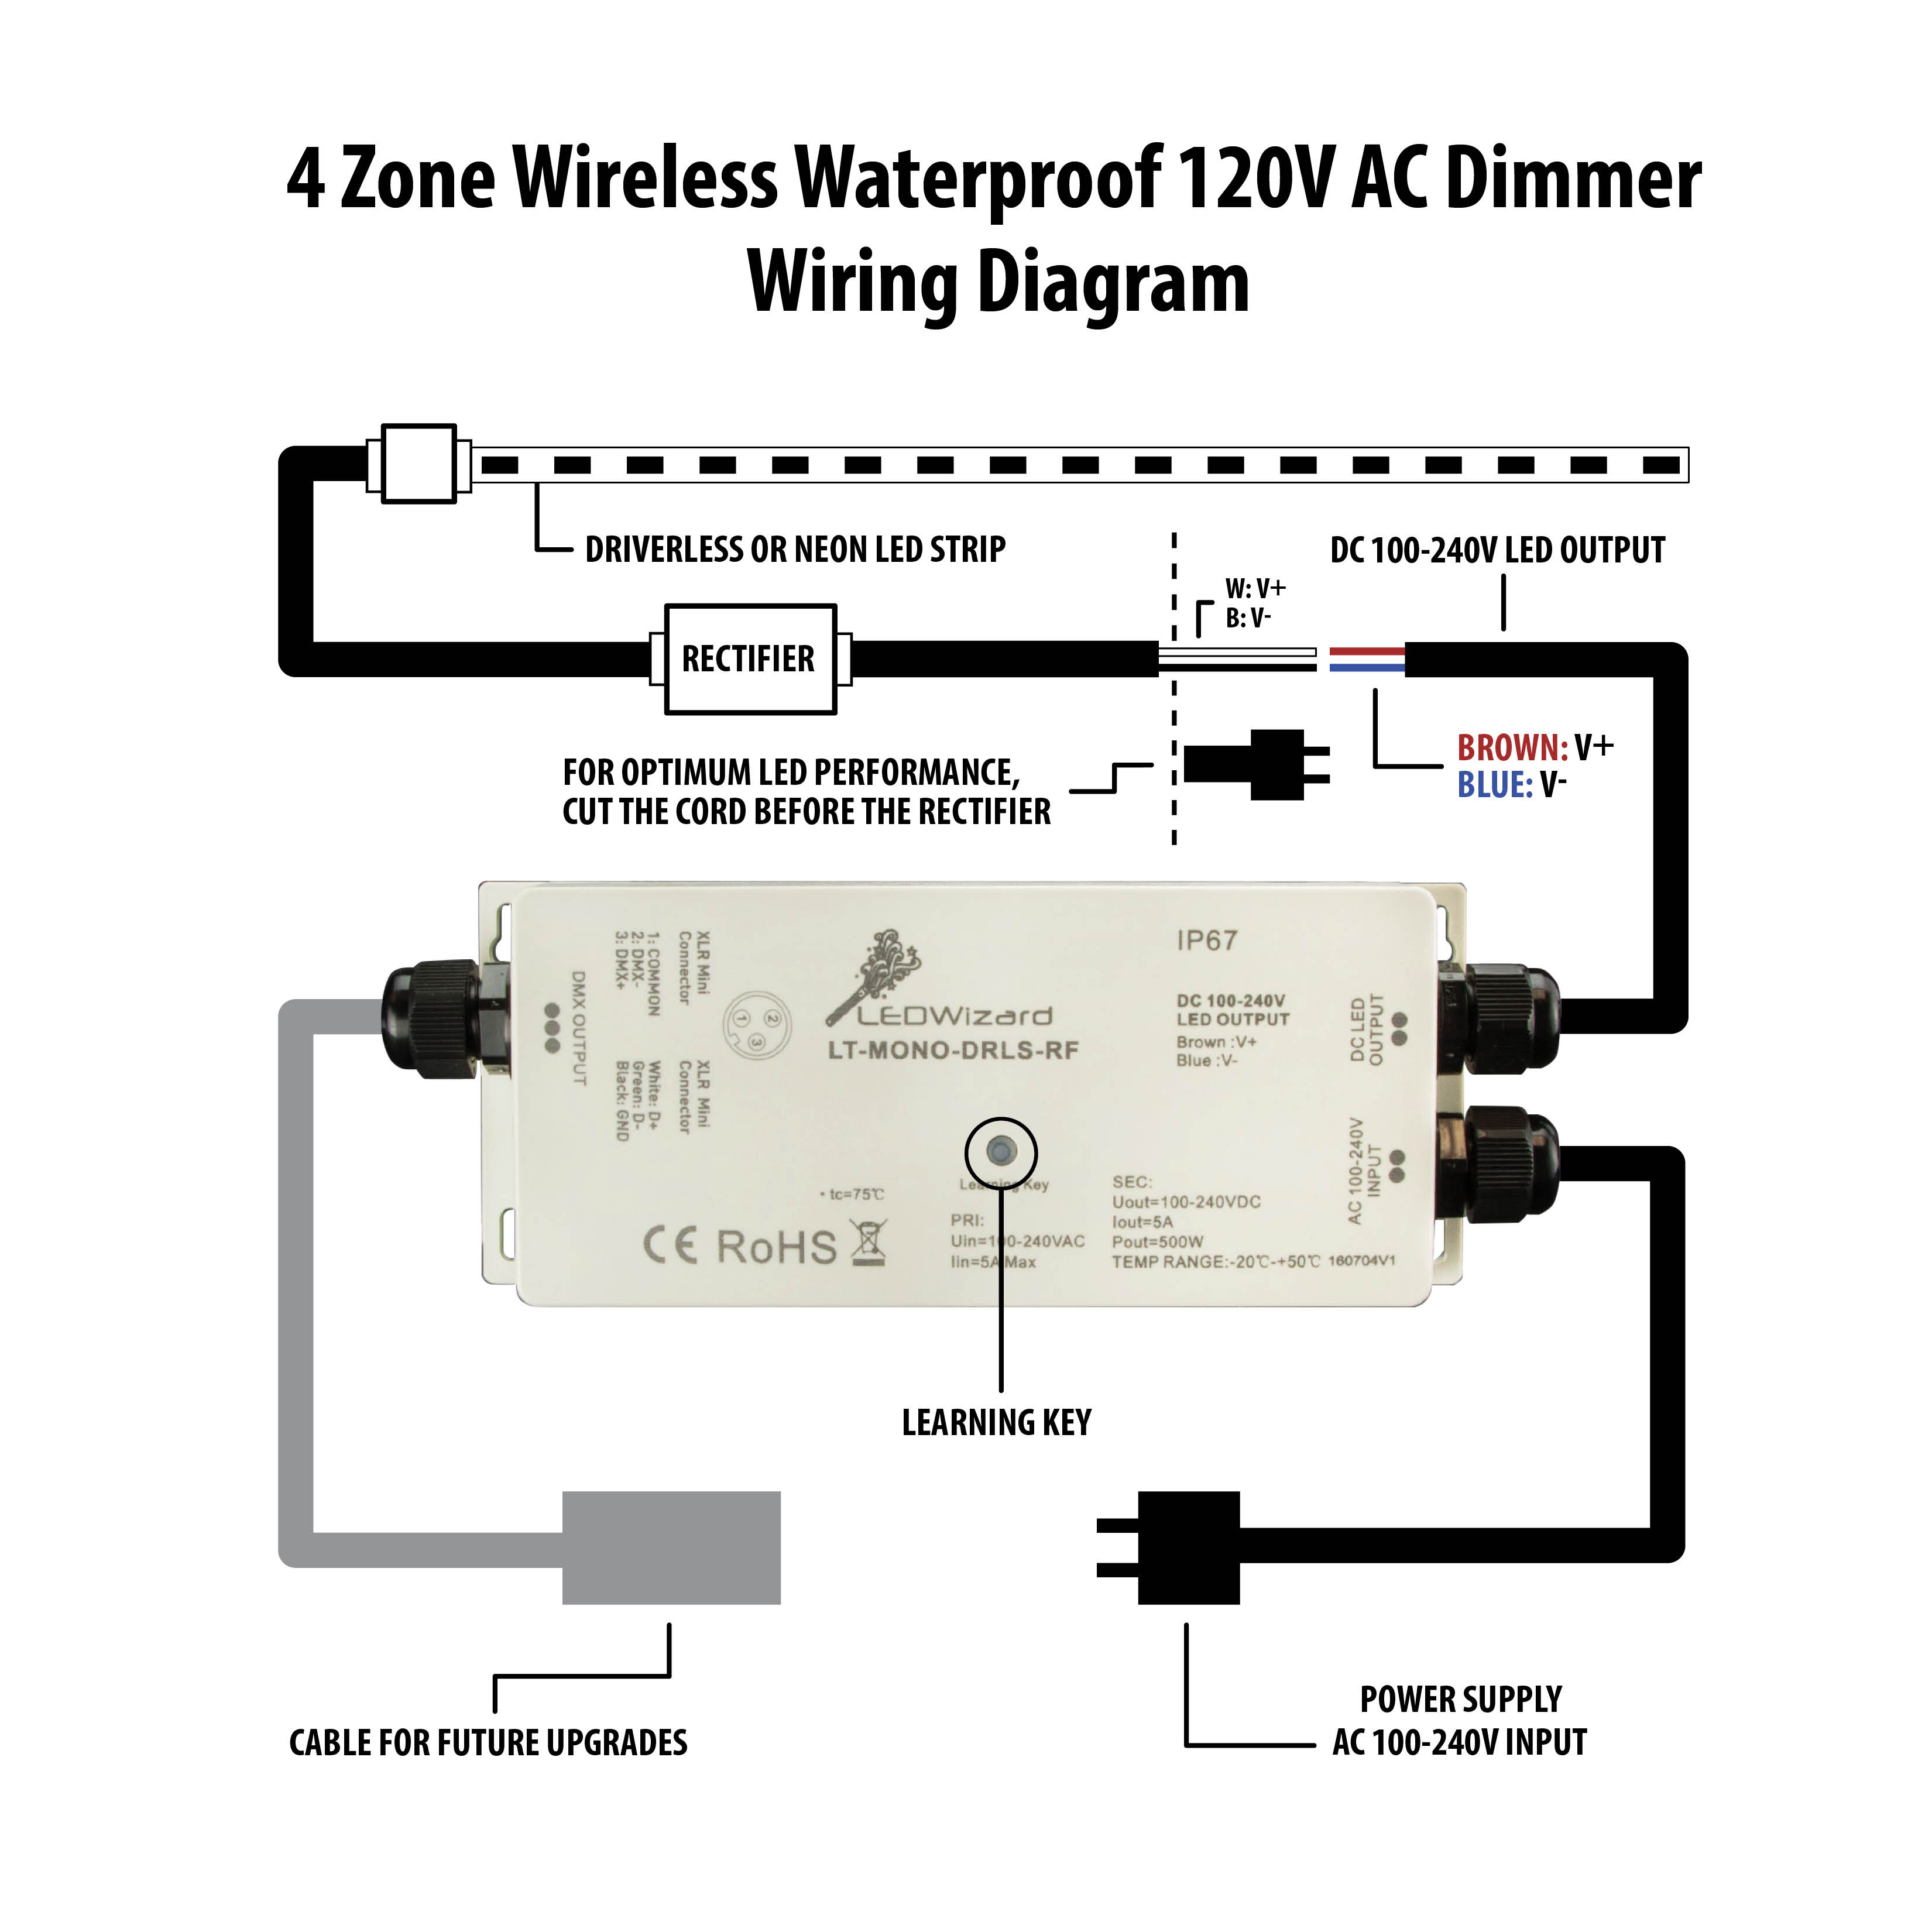 https://www.solidapollo.com/images/tab/4-Zone-Wireless-Waterproof-120V-AC-Dimmer-Diagram.jpg